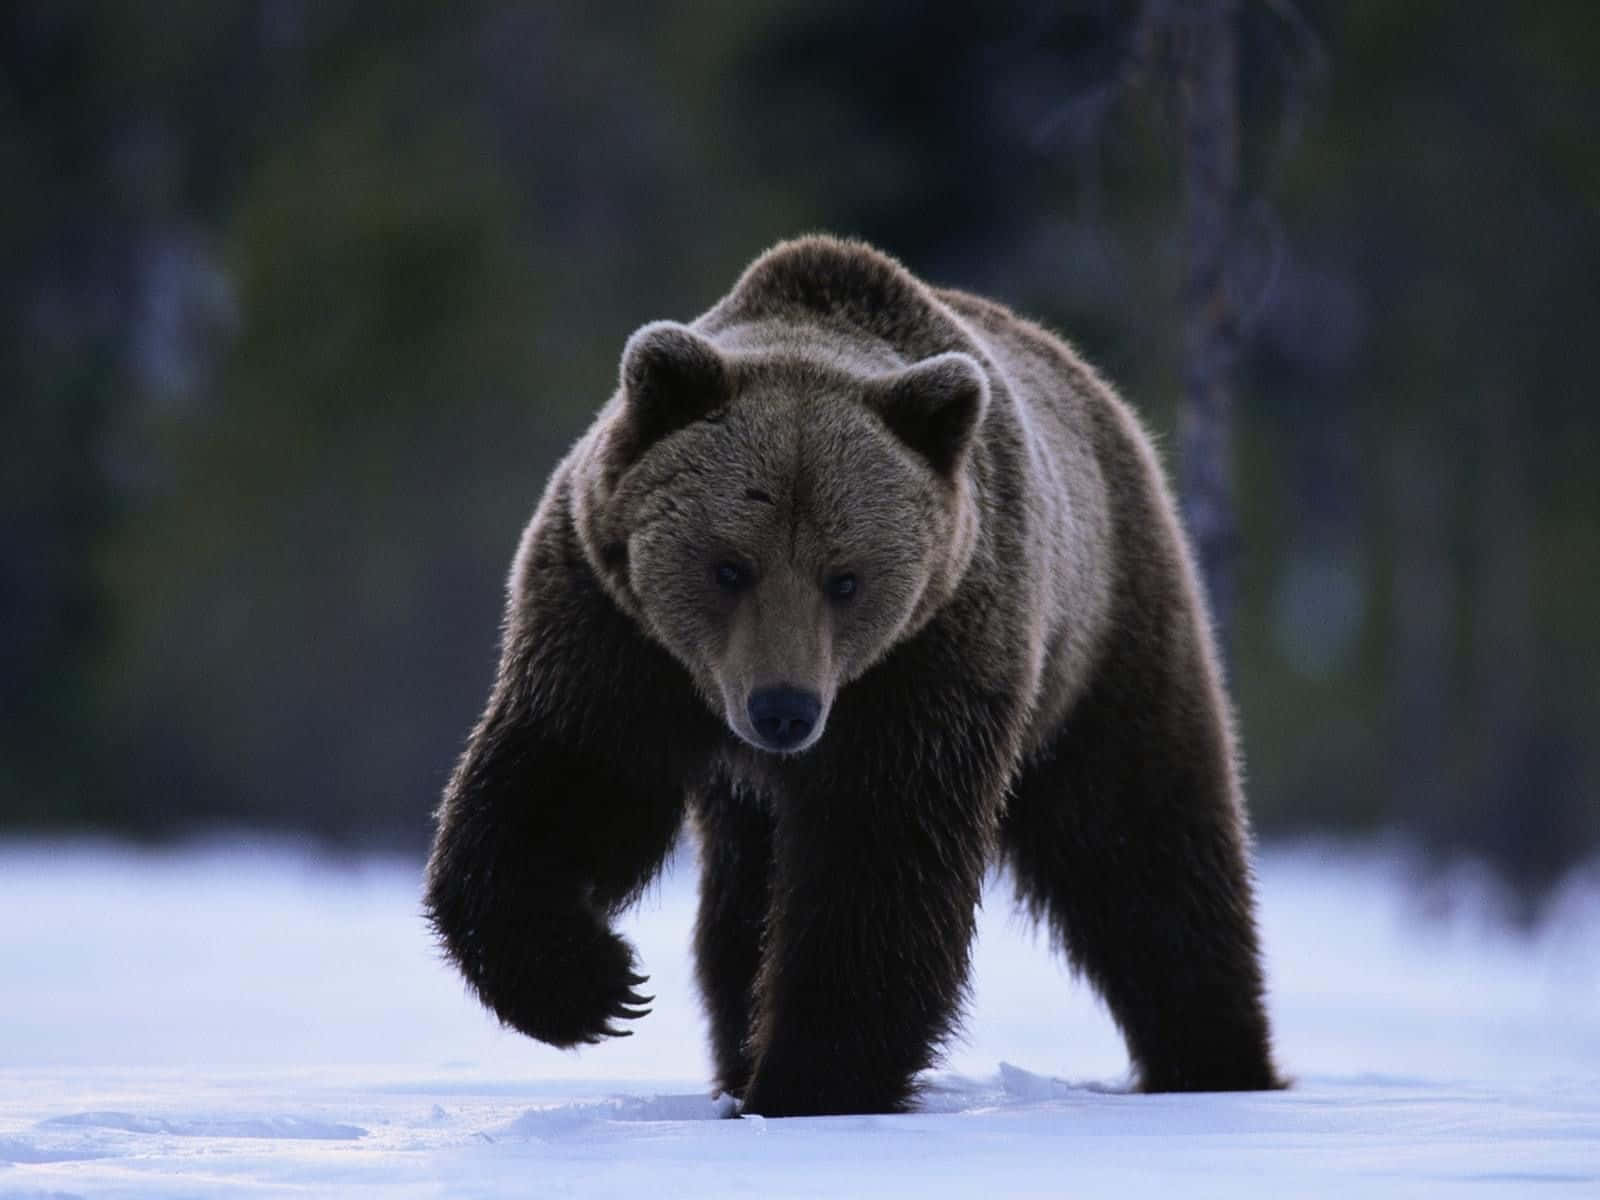 A fierce brown bear lunges at another animal amid an intense bear attack